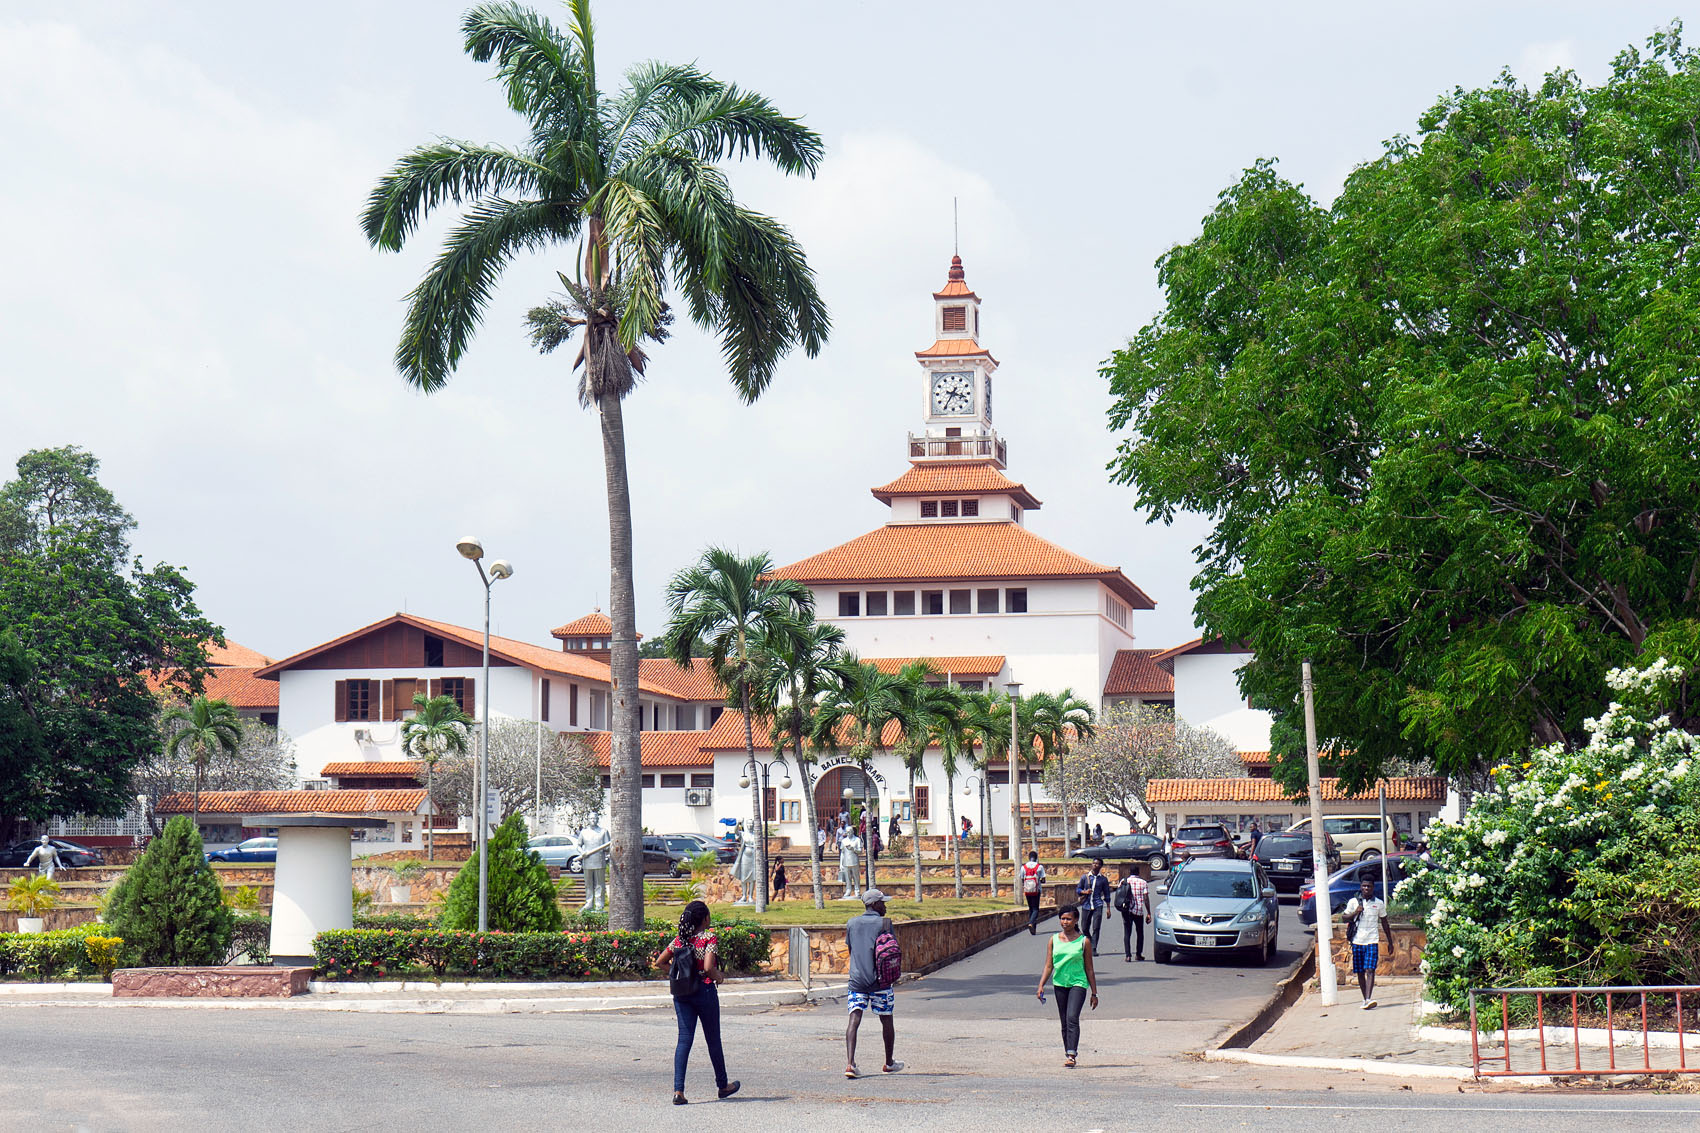 University of Ghana ranked as best West African university for July 2020